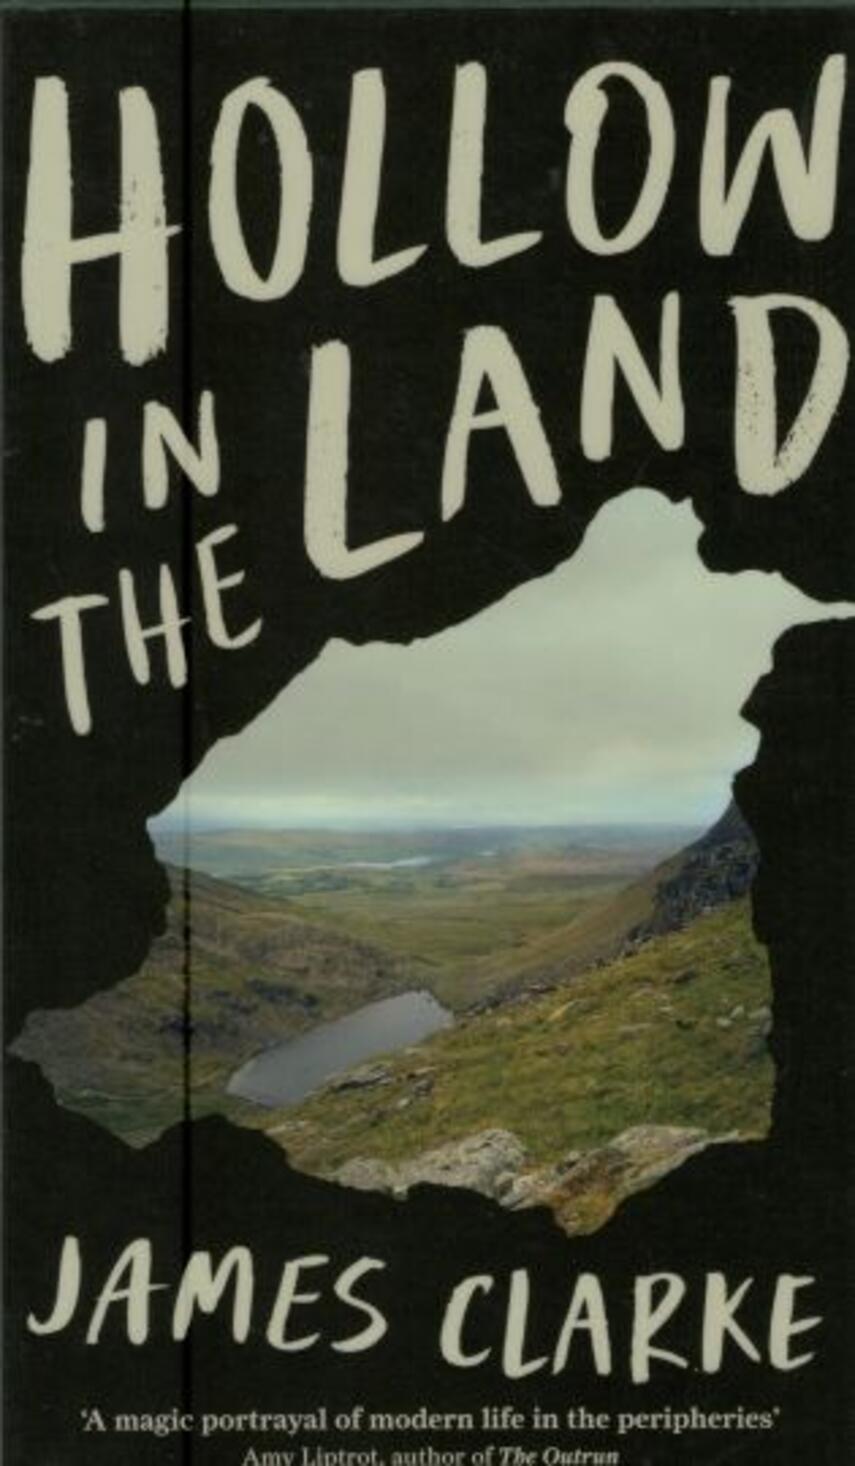 James Clarke: Hollow in the land